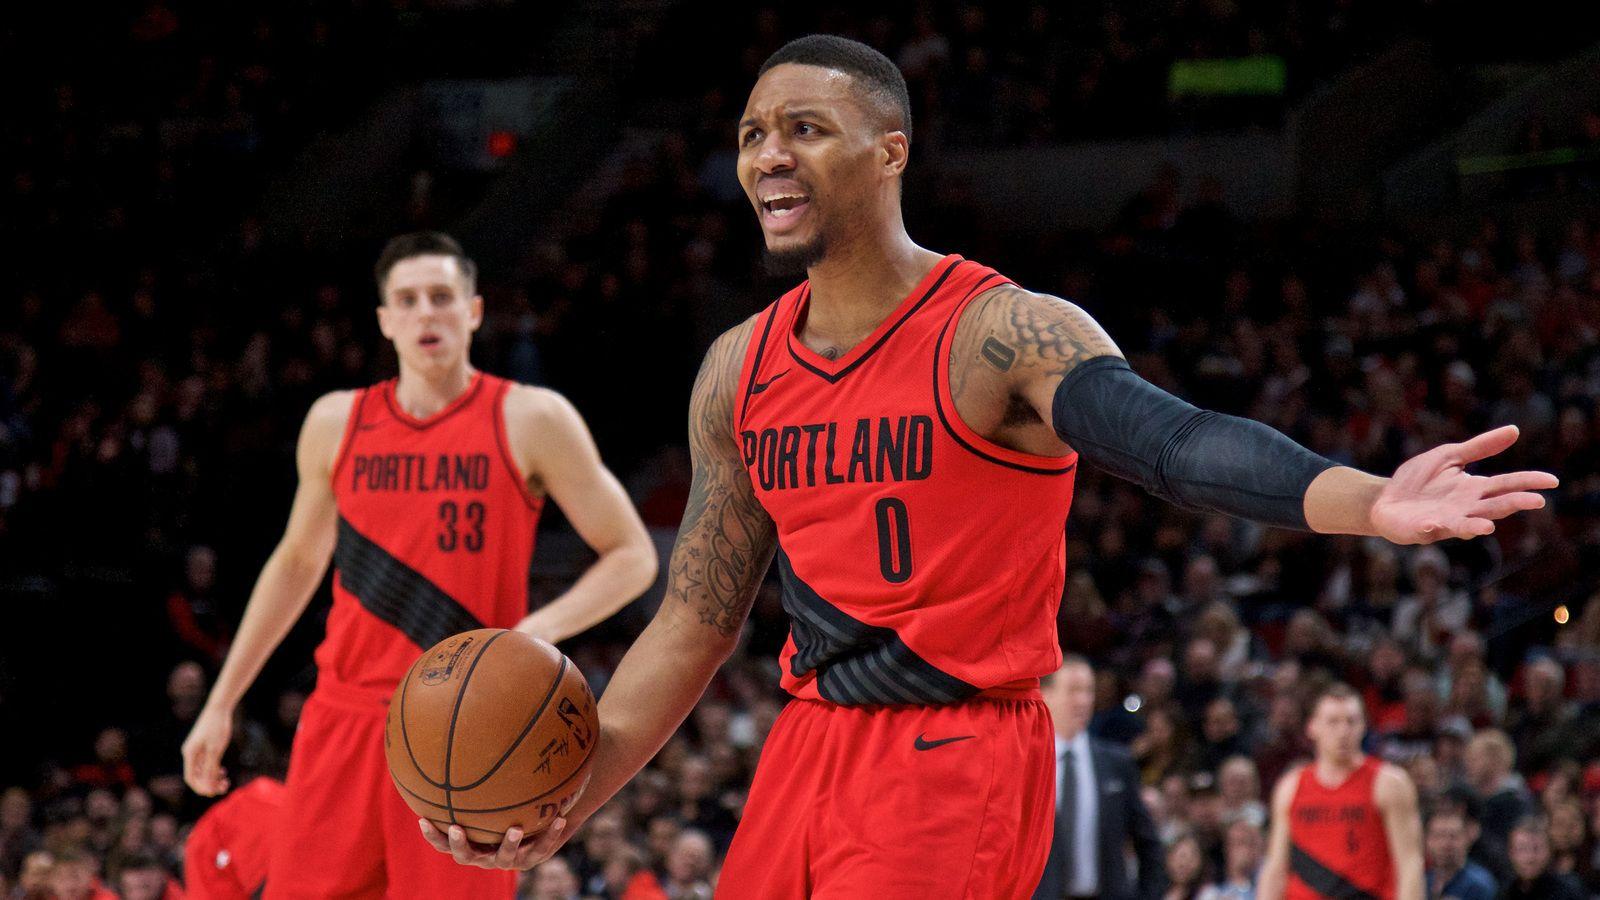 Damian Lillard talks with security over mother's incident with fan